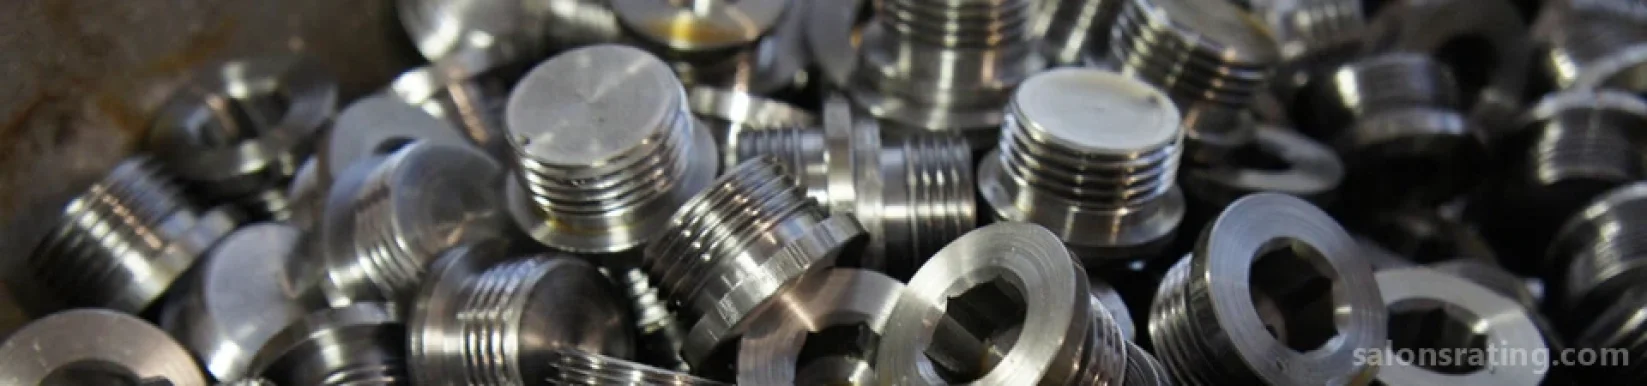 Cleveland Screw Products Inc, Cleveland - 